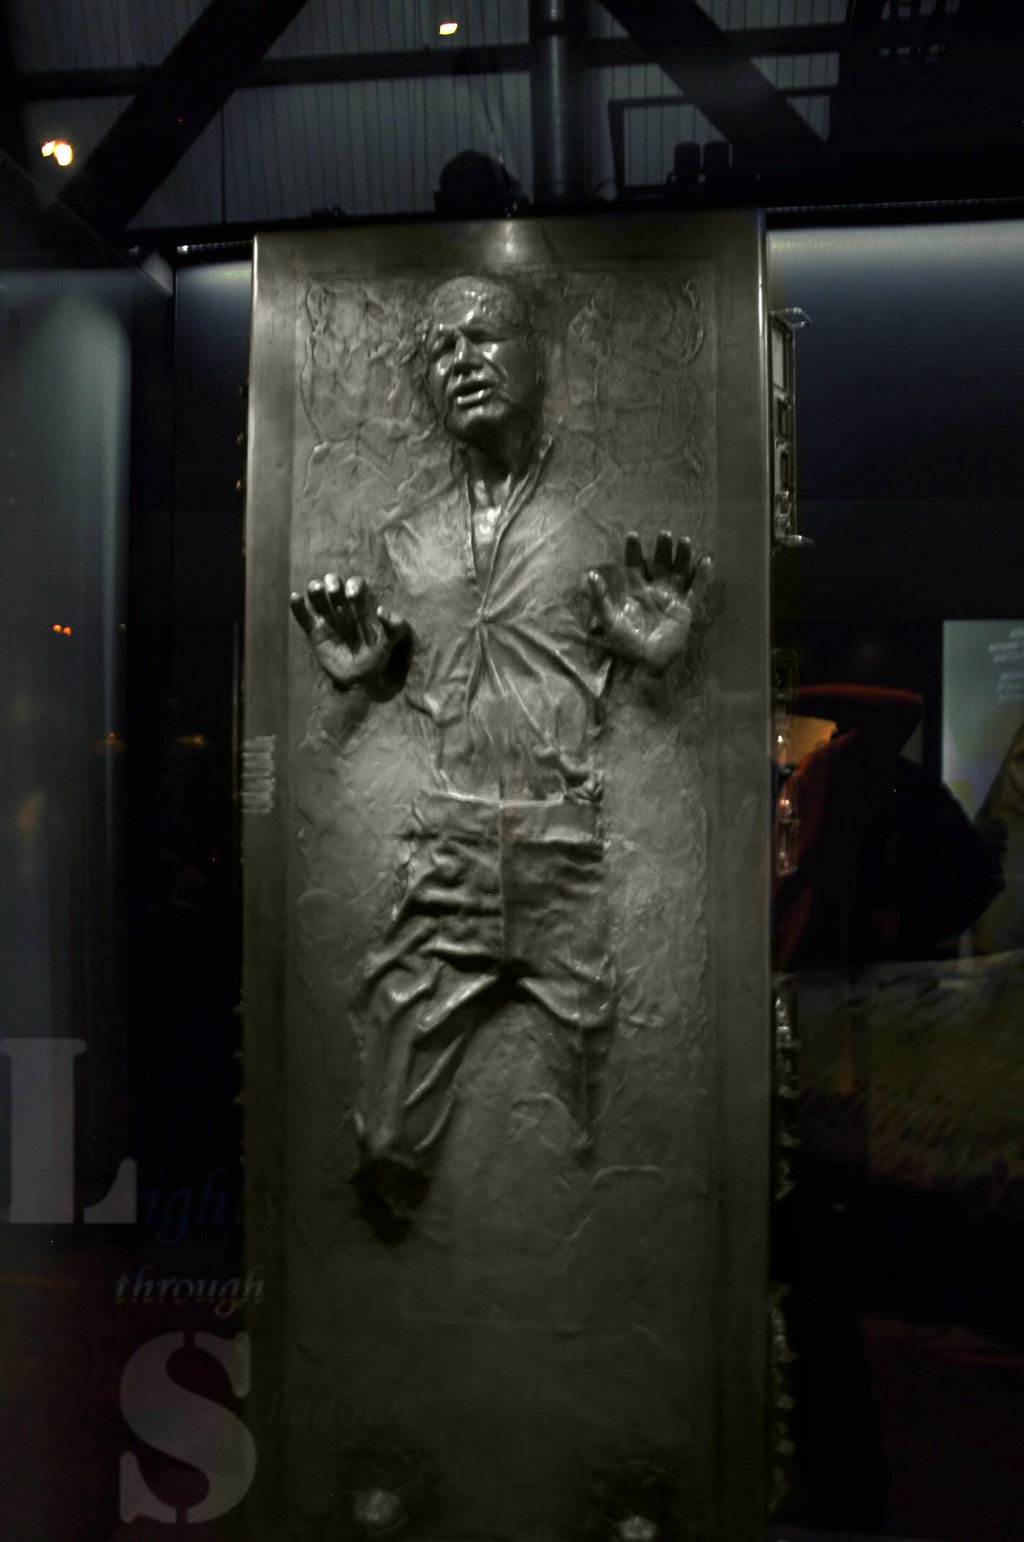 Carbonite Han Solo At Star Wars Exhibit By Lightsthroughshadow On